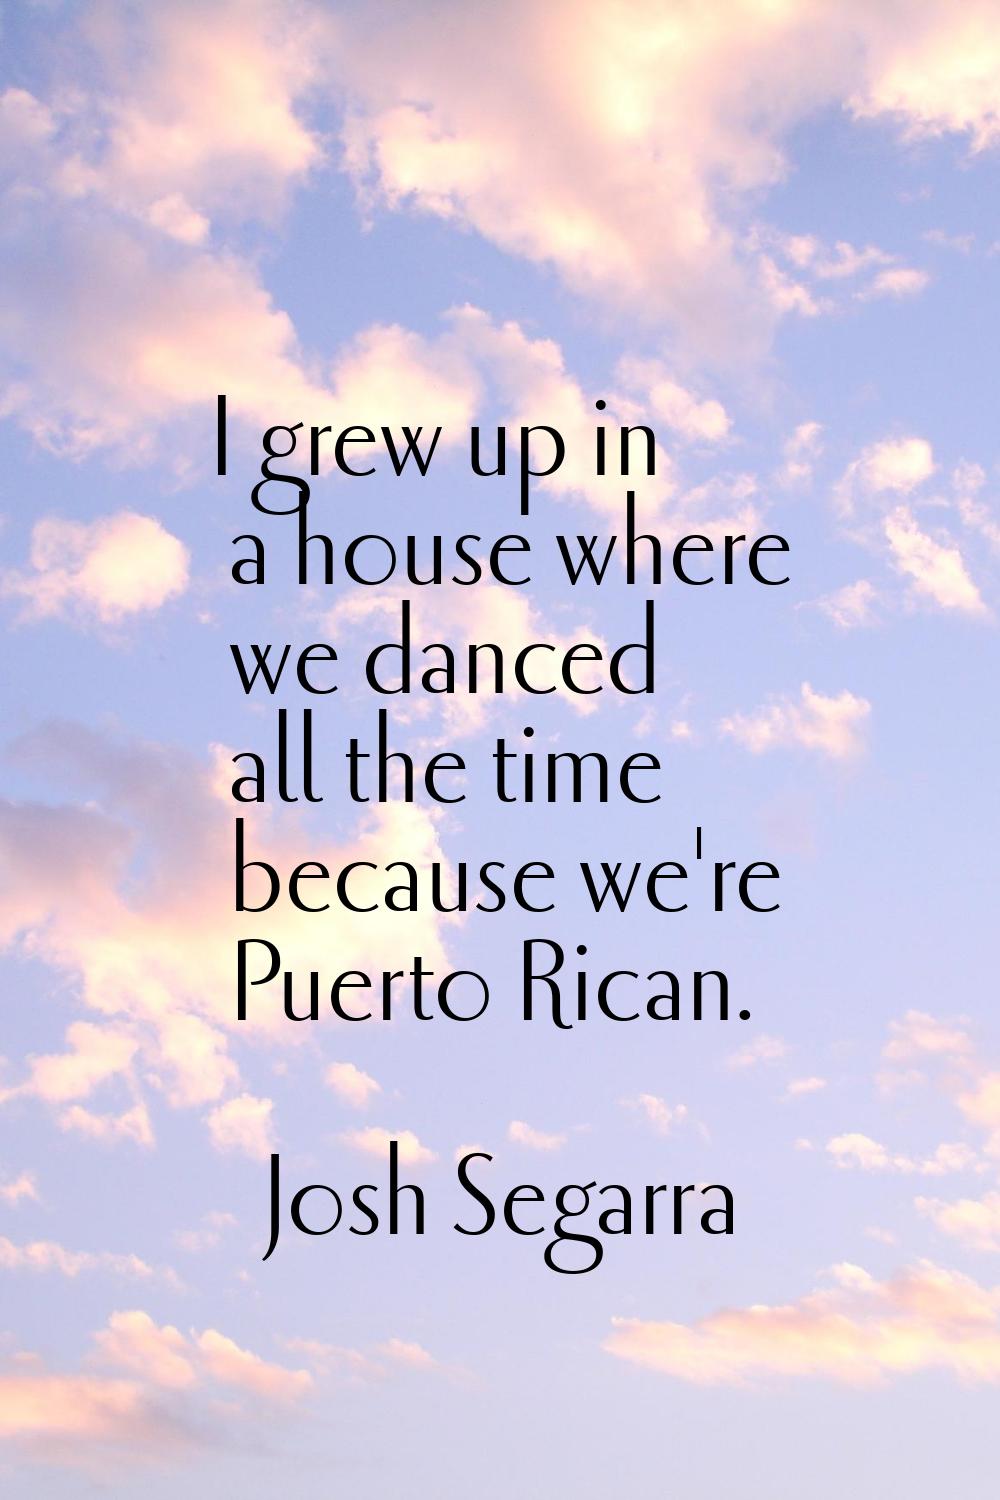 I grew up in a house where we danced all the time because we're Puerto Rican.